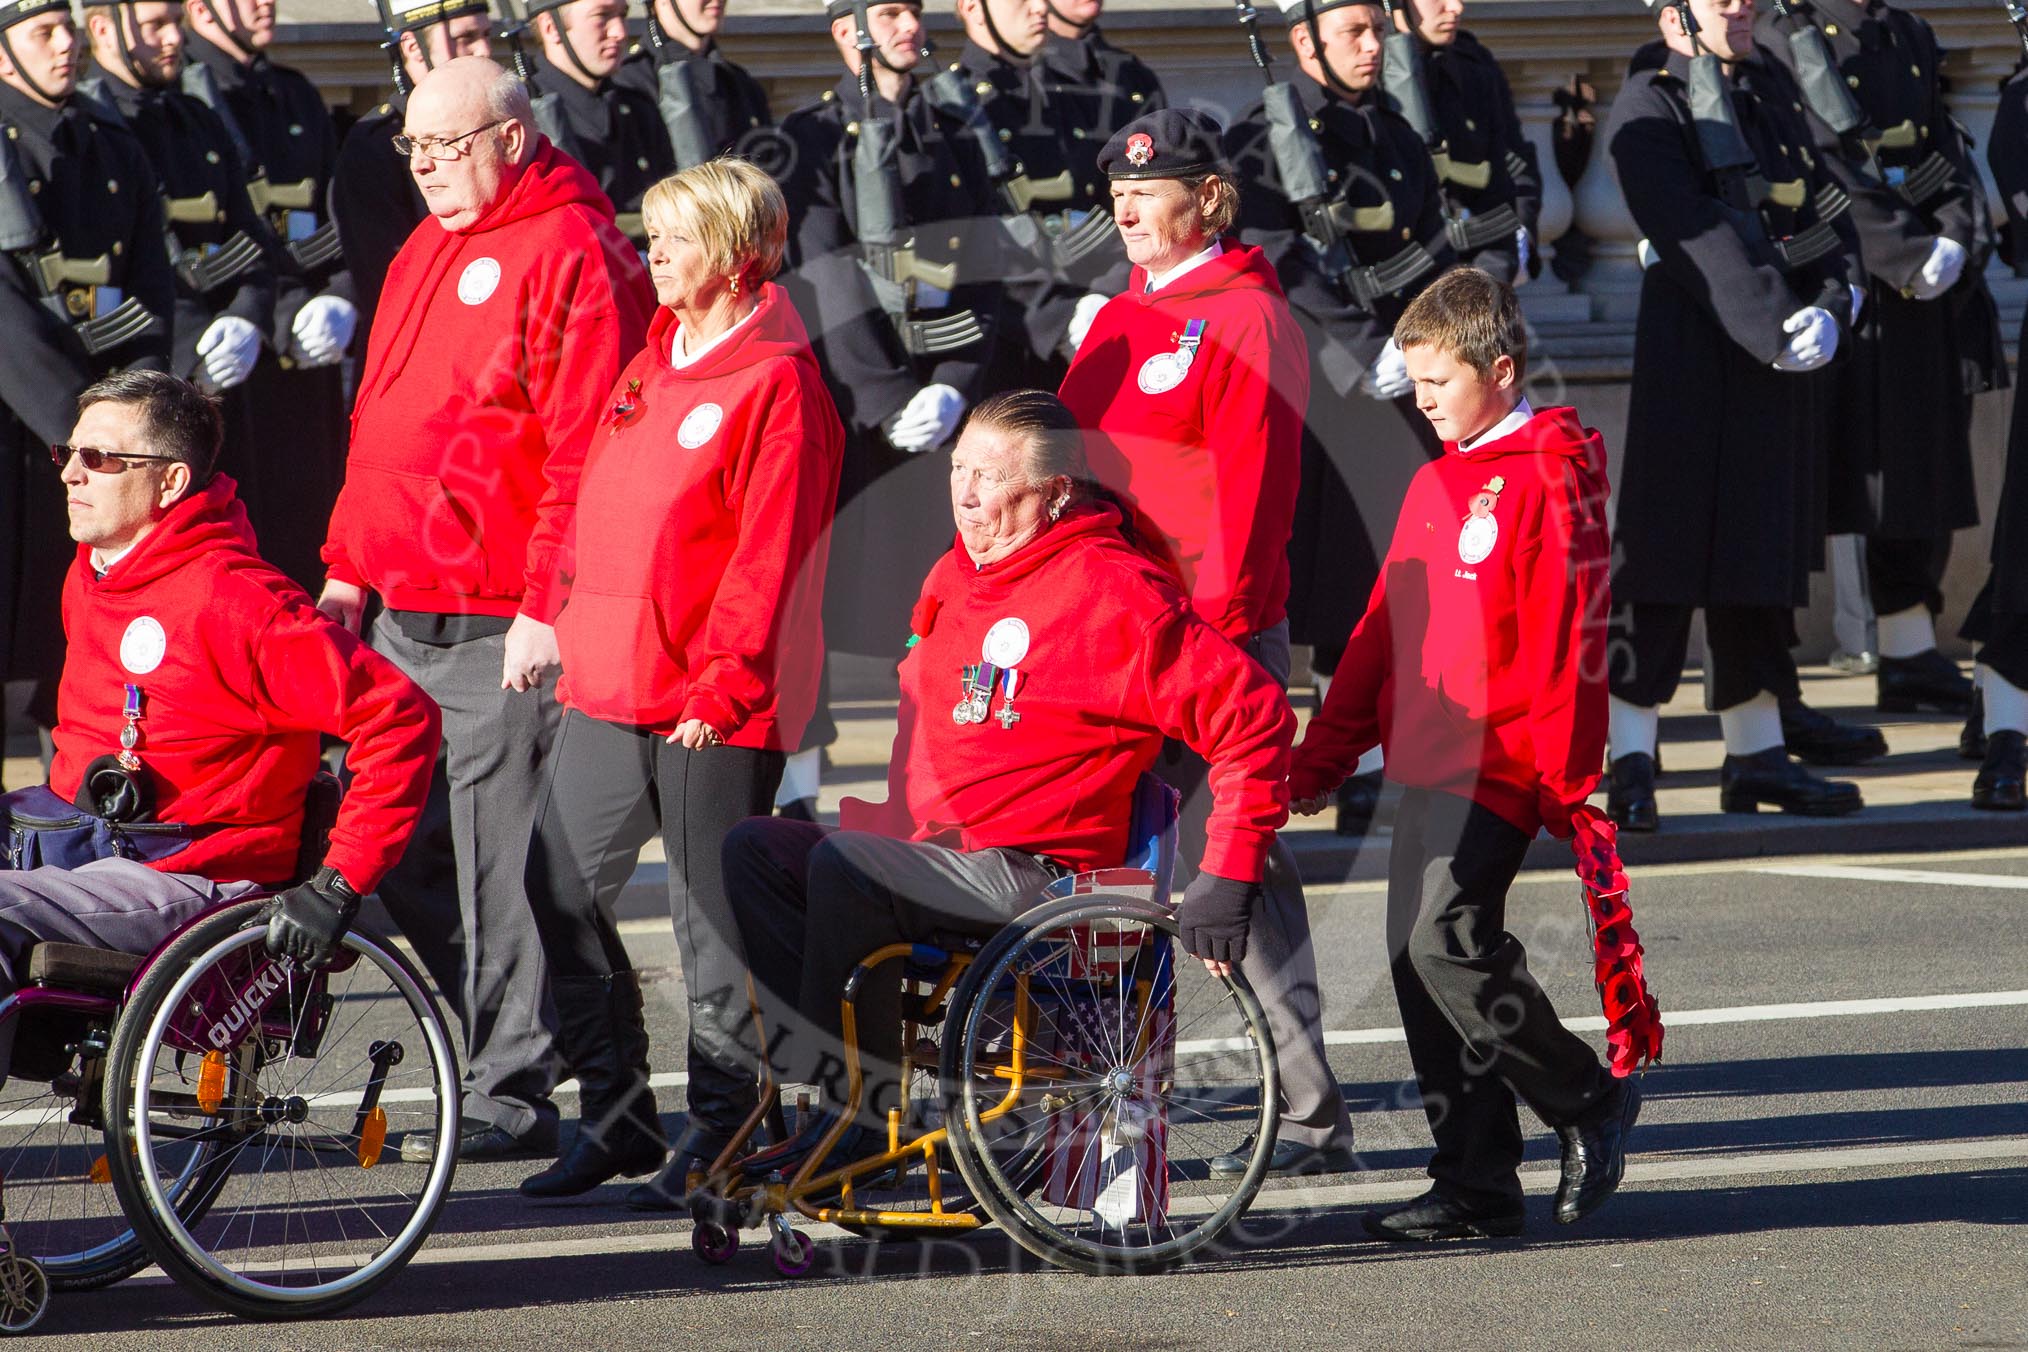 Remembrance Sunday 2012 Cenotaph March Past: Group E42 - British Ex-Services Wheelchair Sports Association..
Whitehall, Cenotaph,
London SW1,

United Kingdom,
on 11 November 2012 at 11:43, image #330